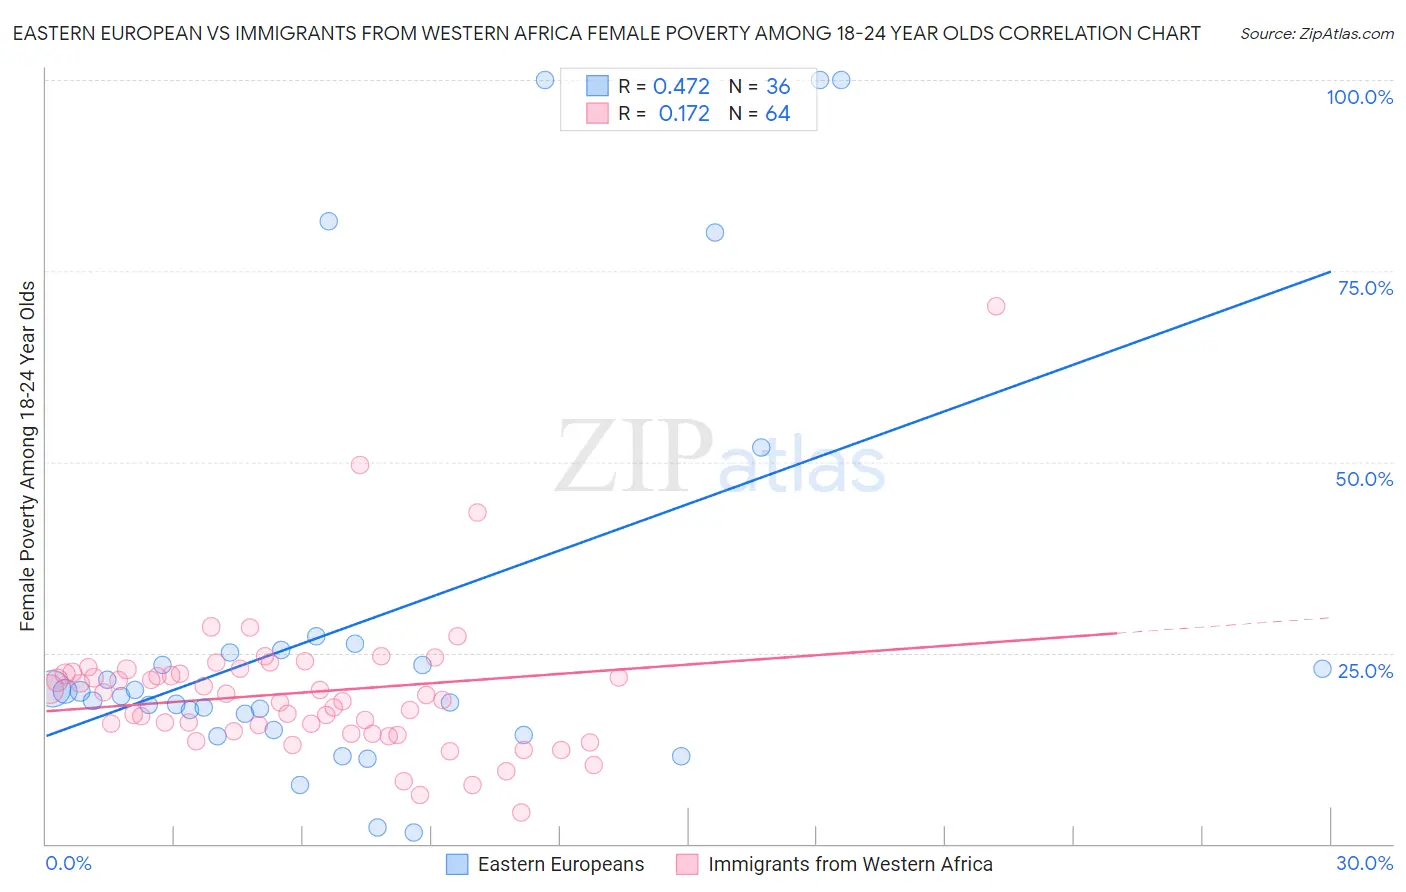 Eastern European vs Immigrants from Western Africa Female Poverty Among 18-24 Year Olds